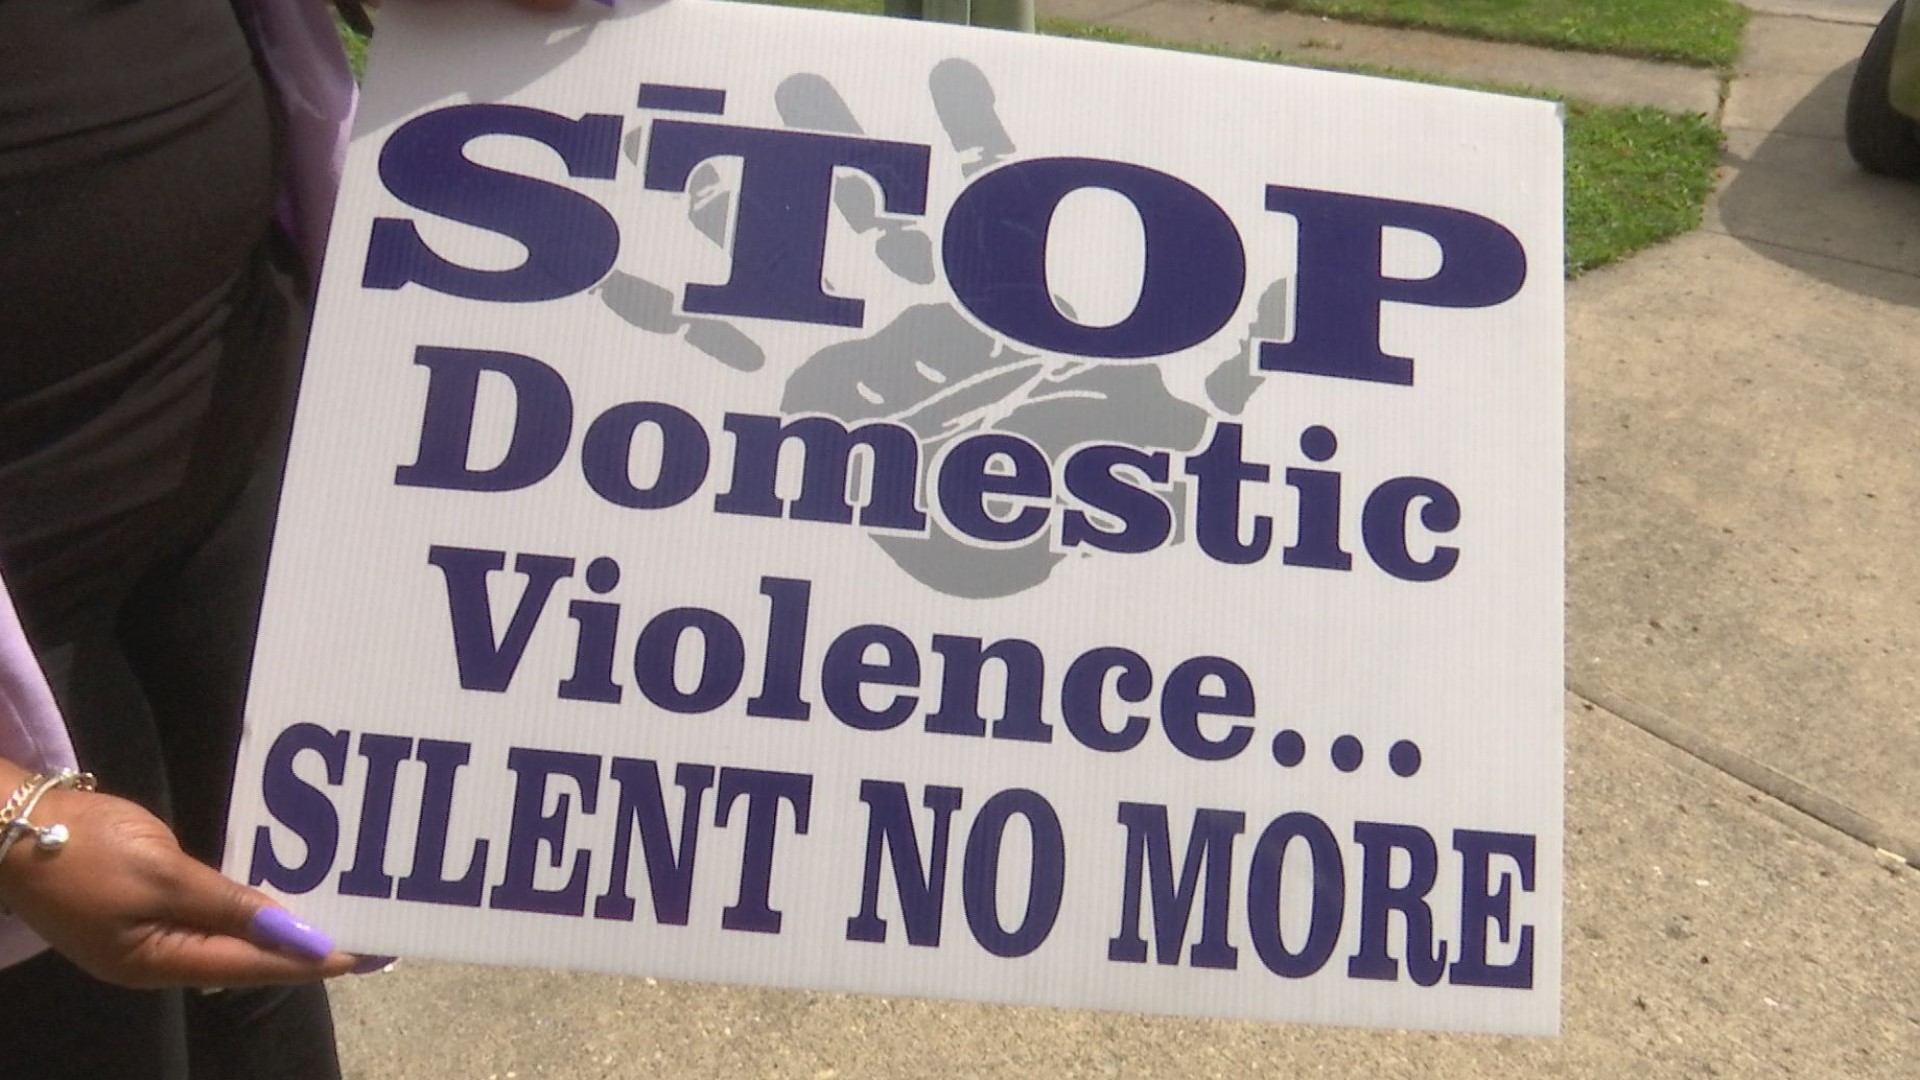 A survivor of domestic abuse and other advocates are calling for more funding to provide shelter and resources to survivors and to honor those who've died.